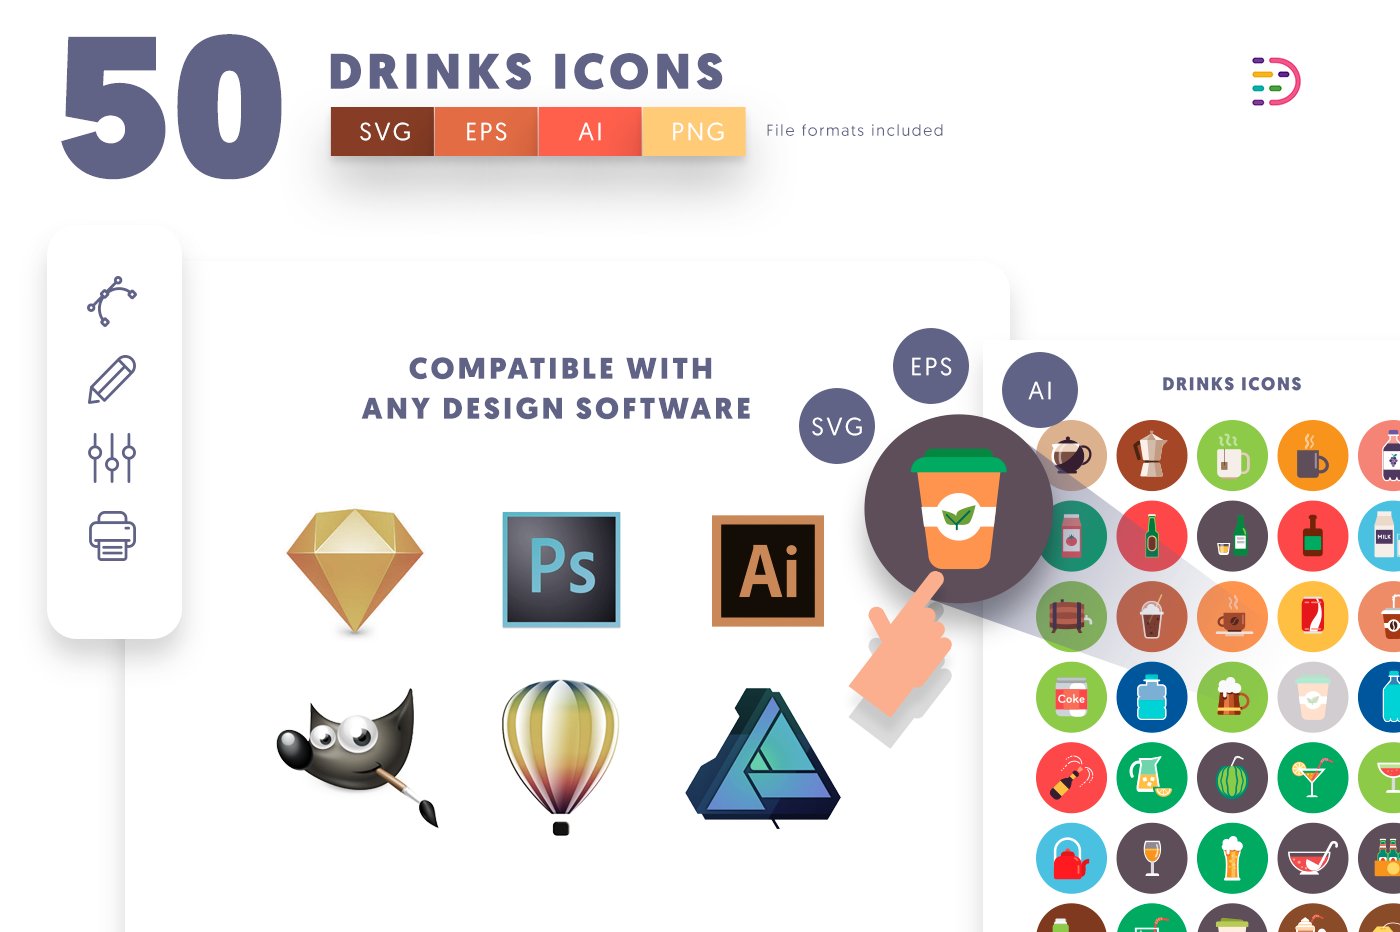 50 drinks icons cover 8 605